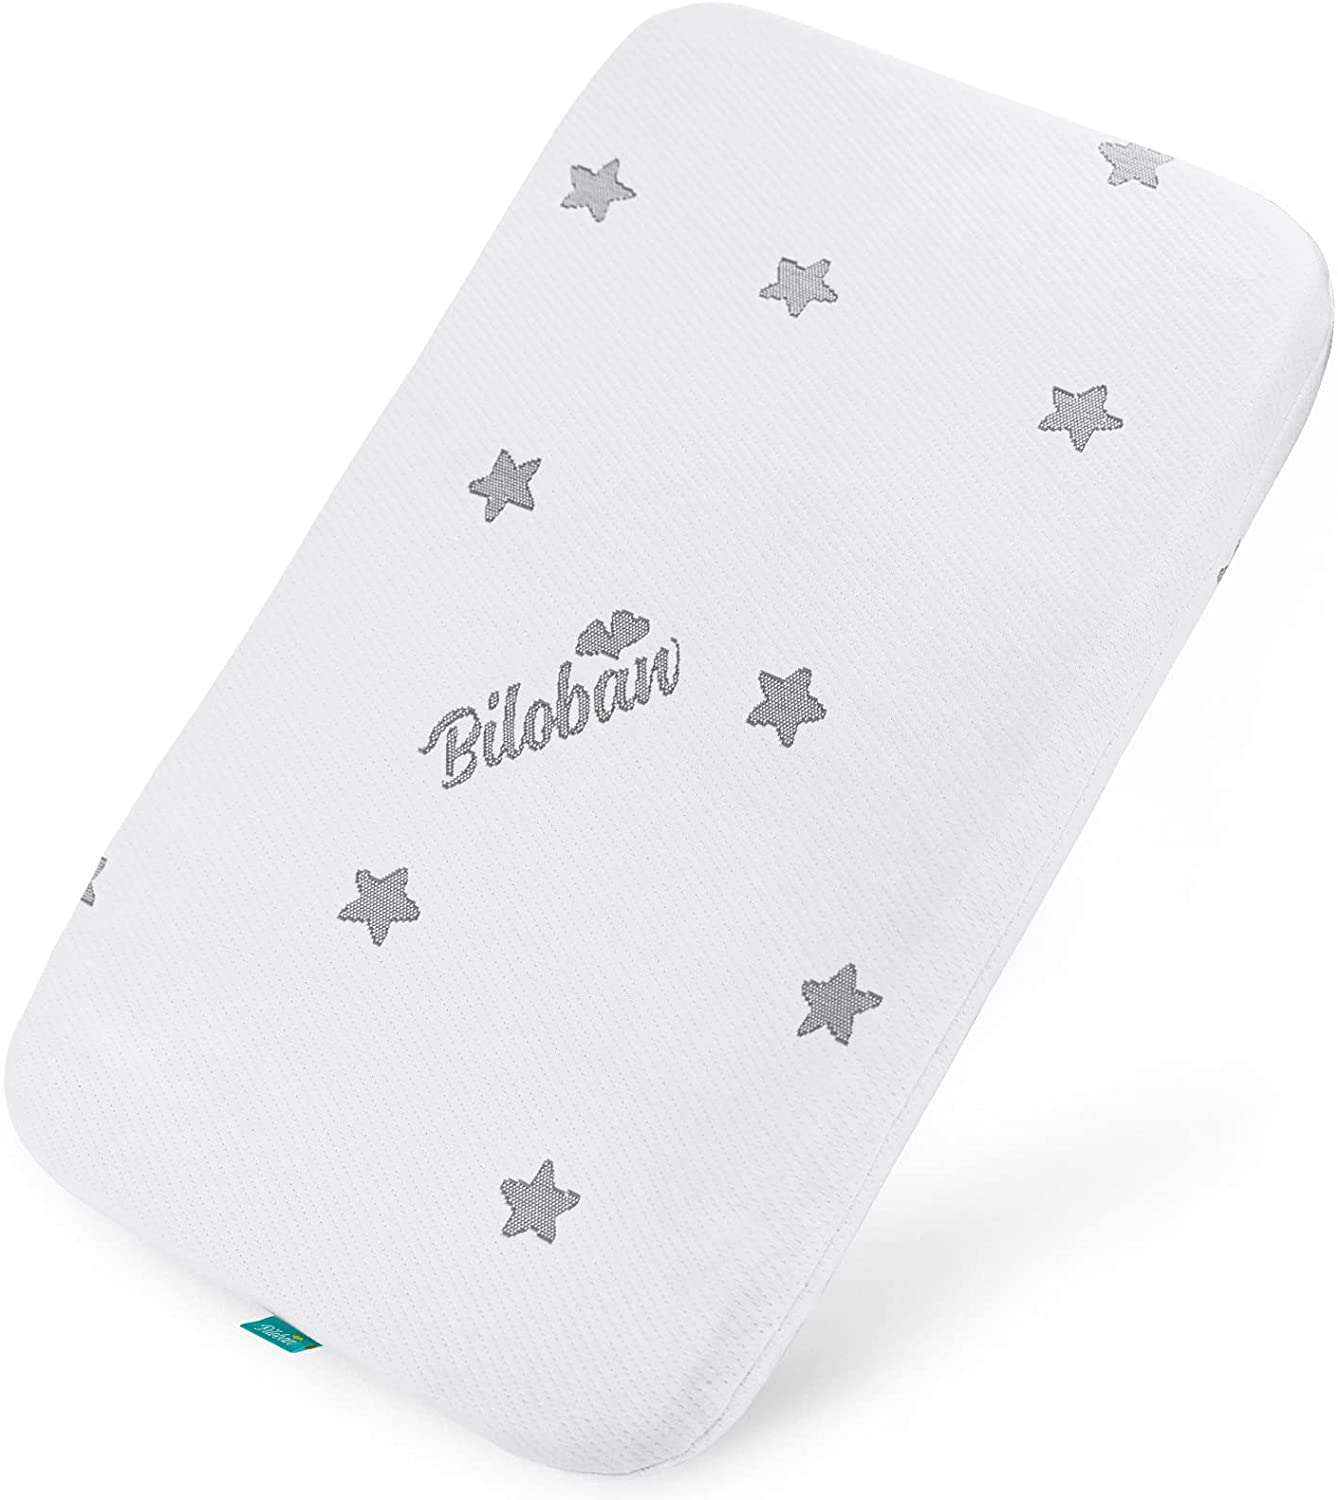 Bassinet Mattress with Waterproof & Breathable Cover, Fits Baby Delight Beside Me Dreamer Bassinet - Biloban Online Store